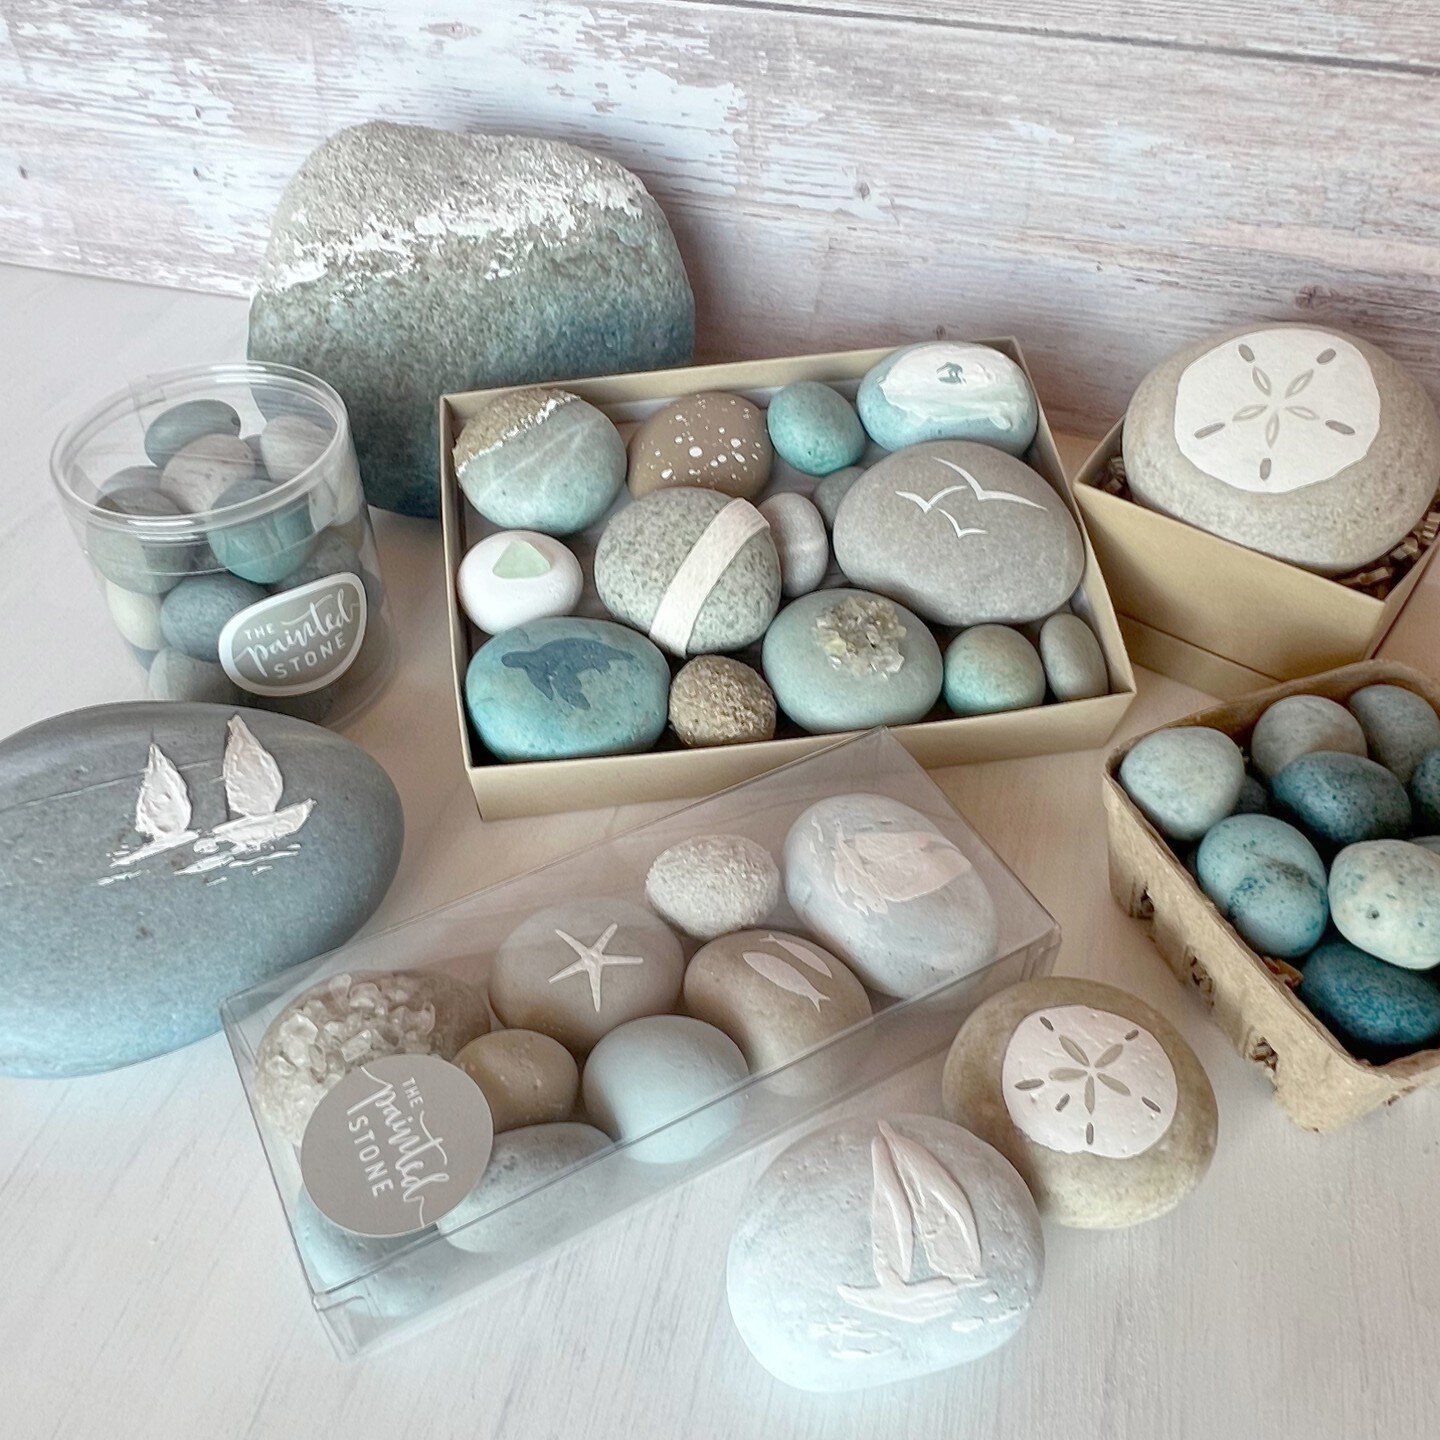 The Painted Stone collections include a range of offerings including our original boxed sets, larger individual stones, and our popular minis! We will be at the Rosseau Farmer's Market this Friday August 4th from 9-2... see you there!